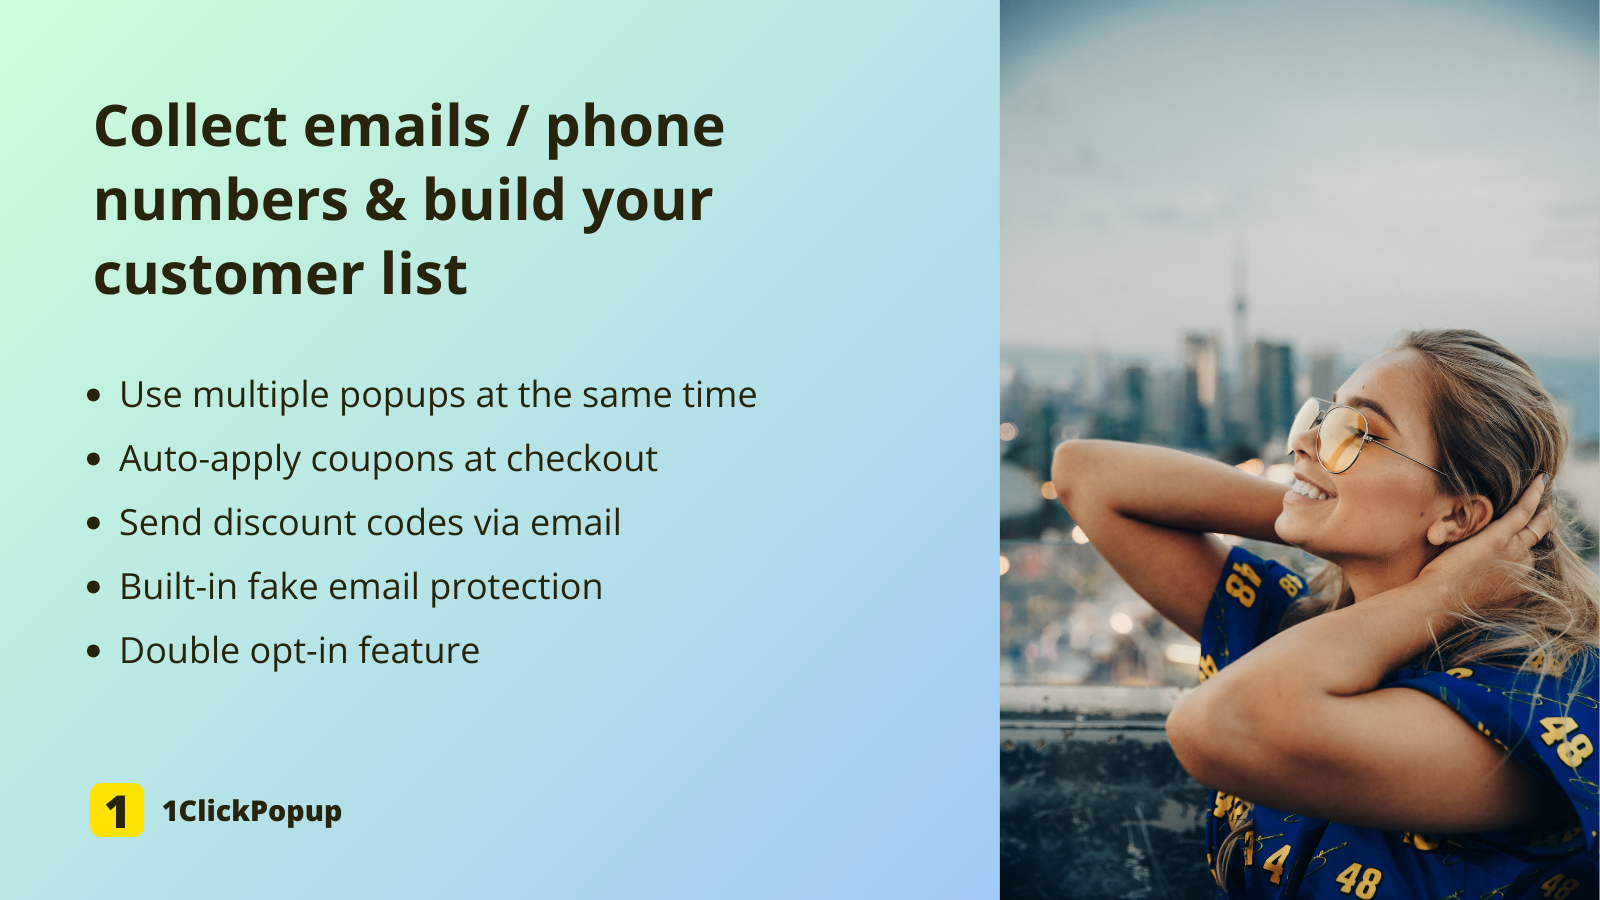 Collect emails / phone numbers & build your customer list